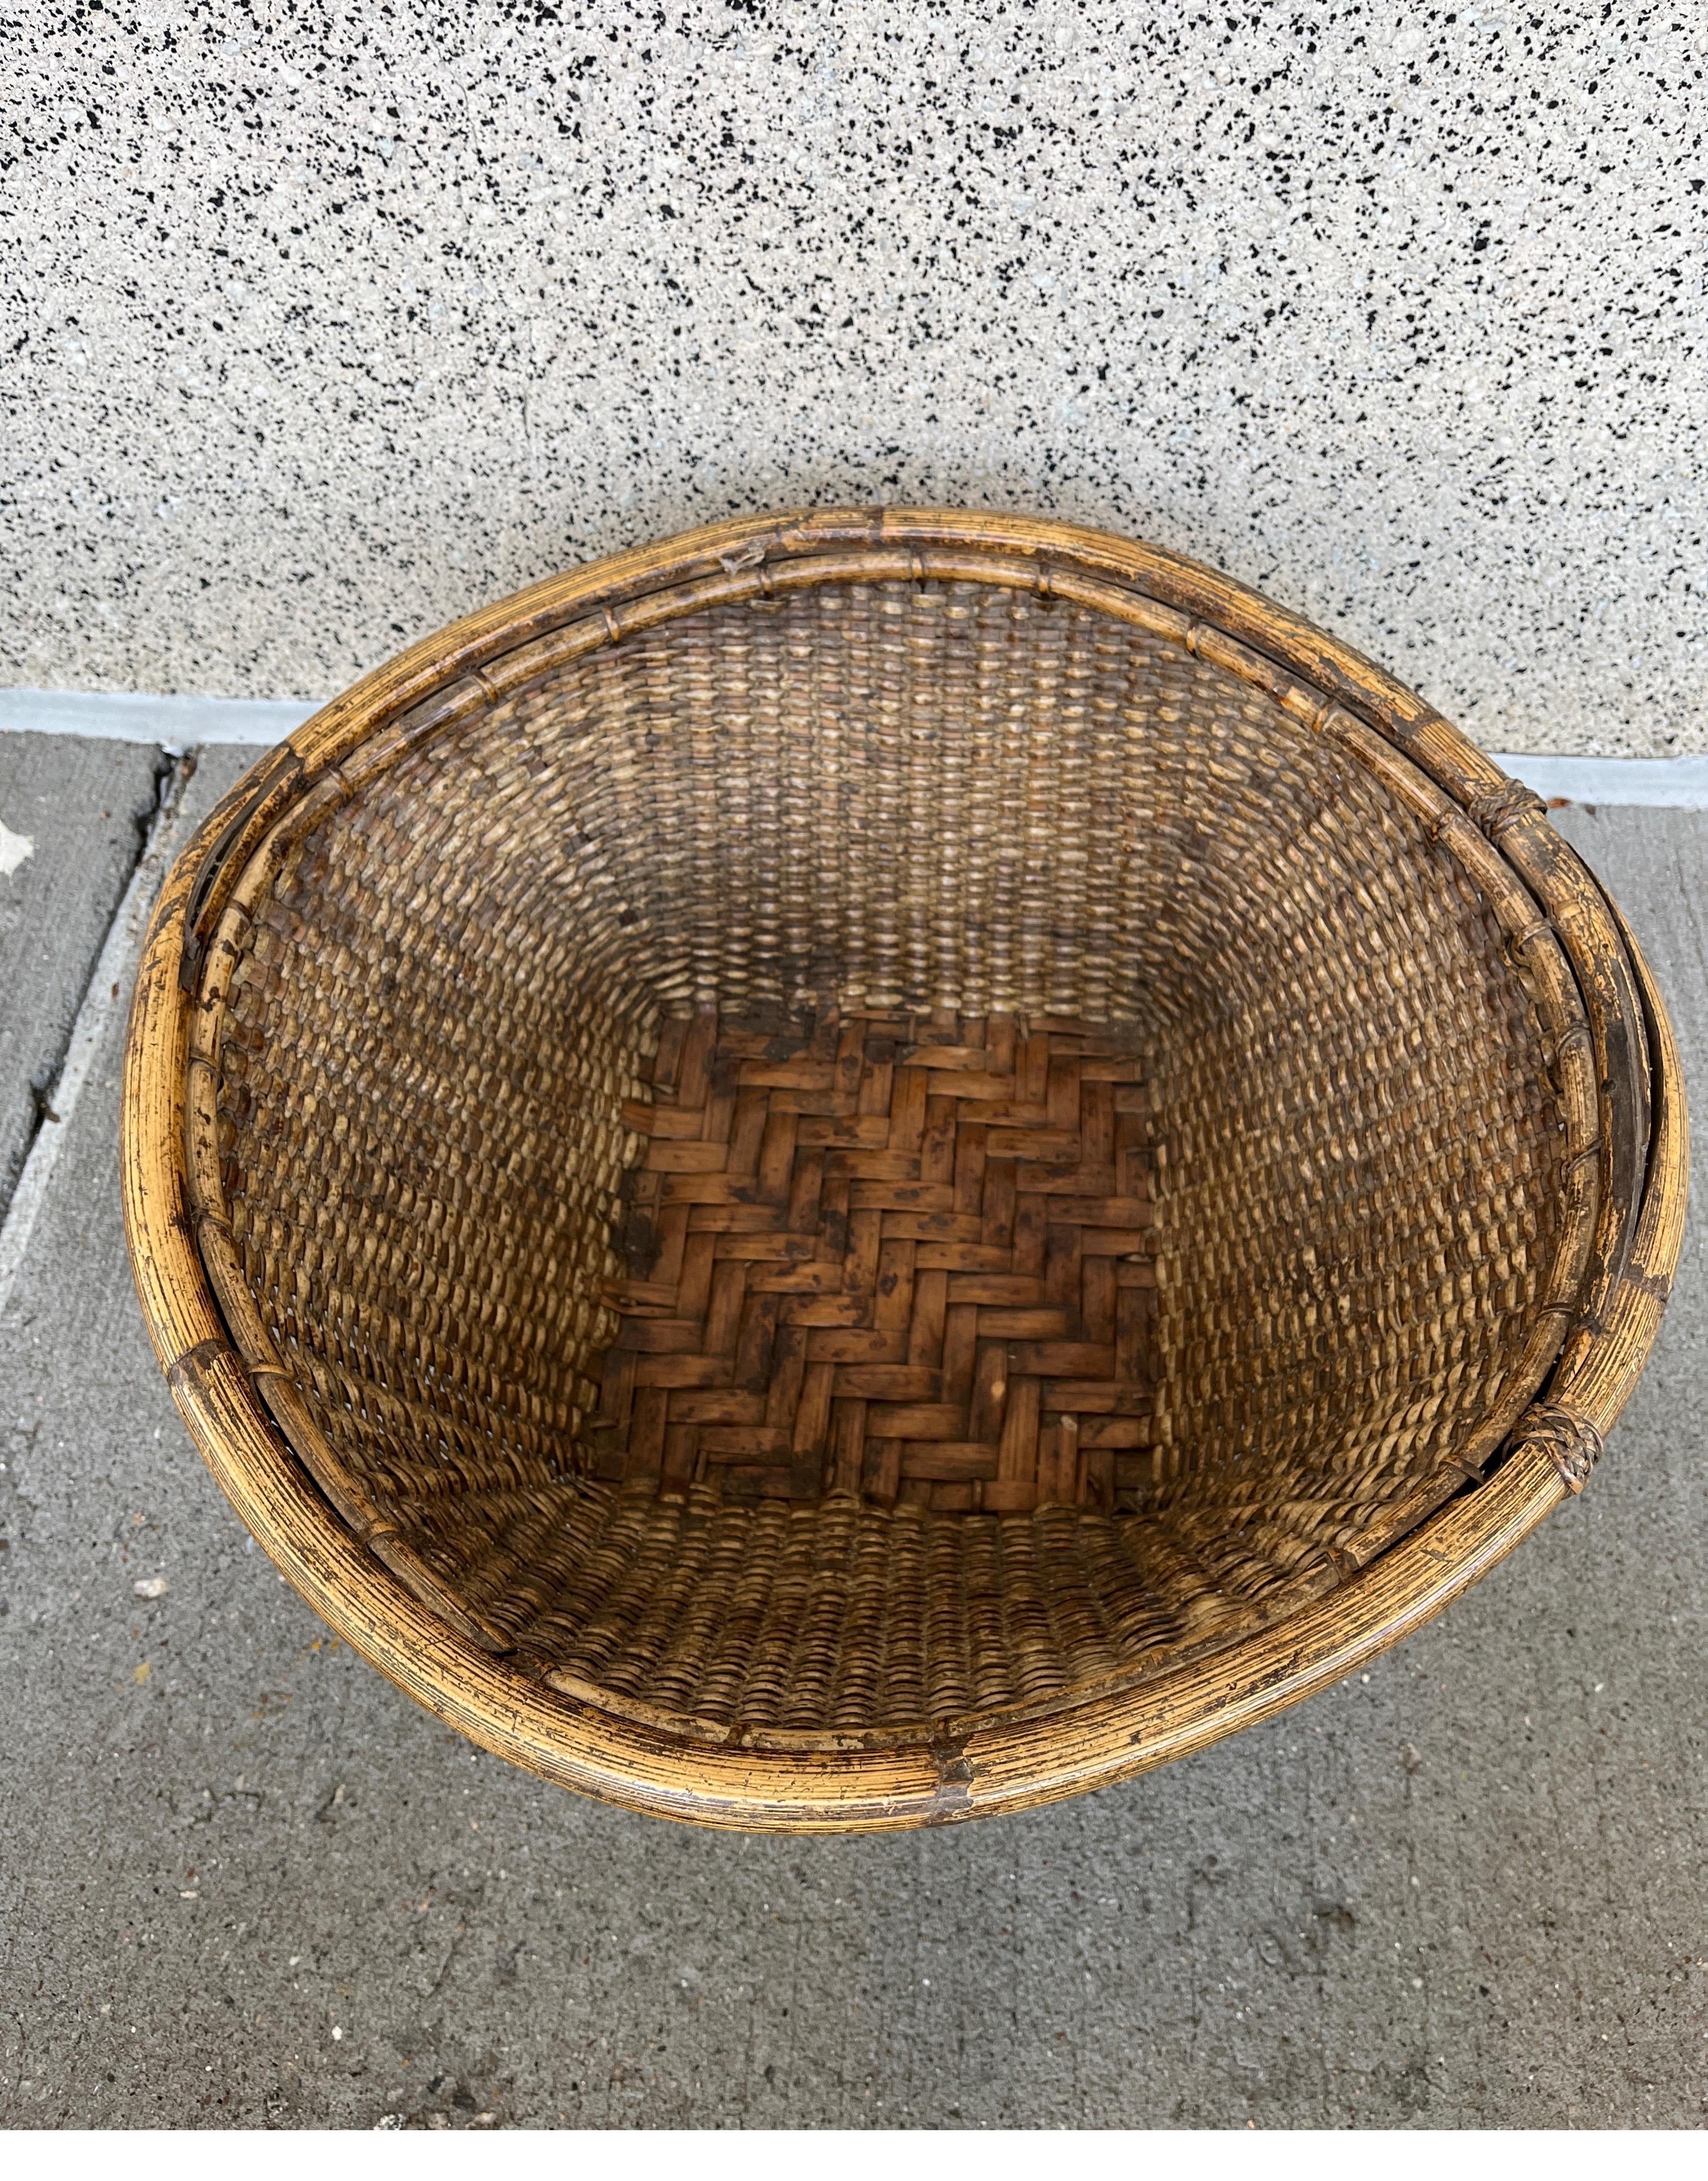 Contemporary Woven Basket, Phillipines 2